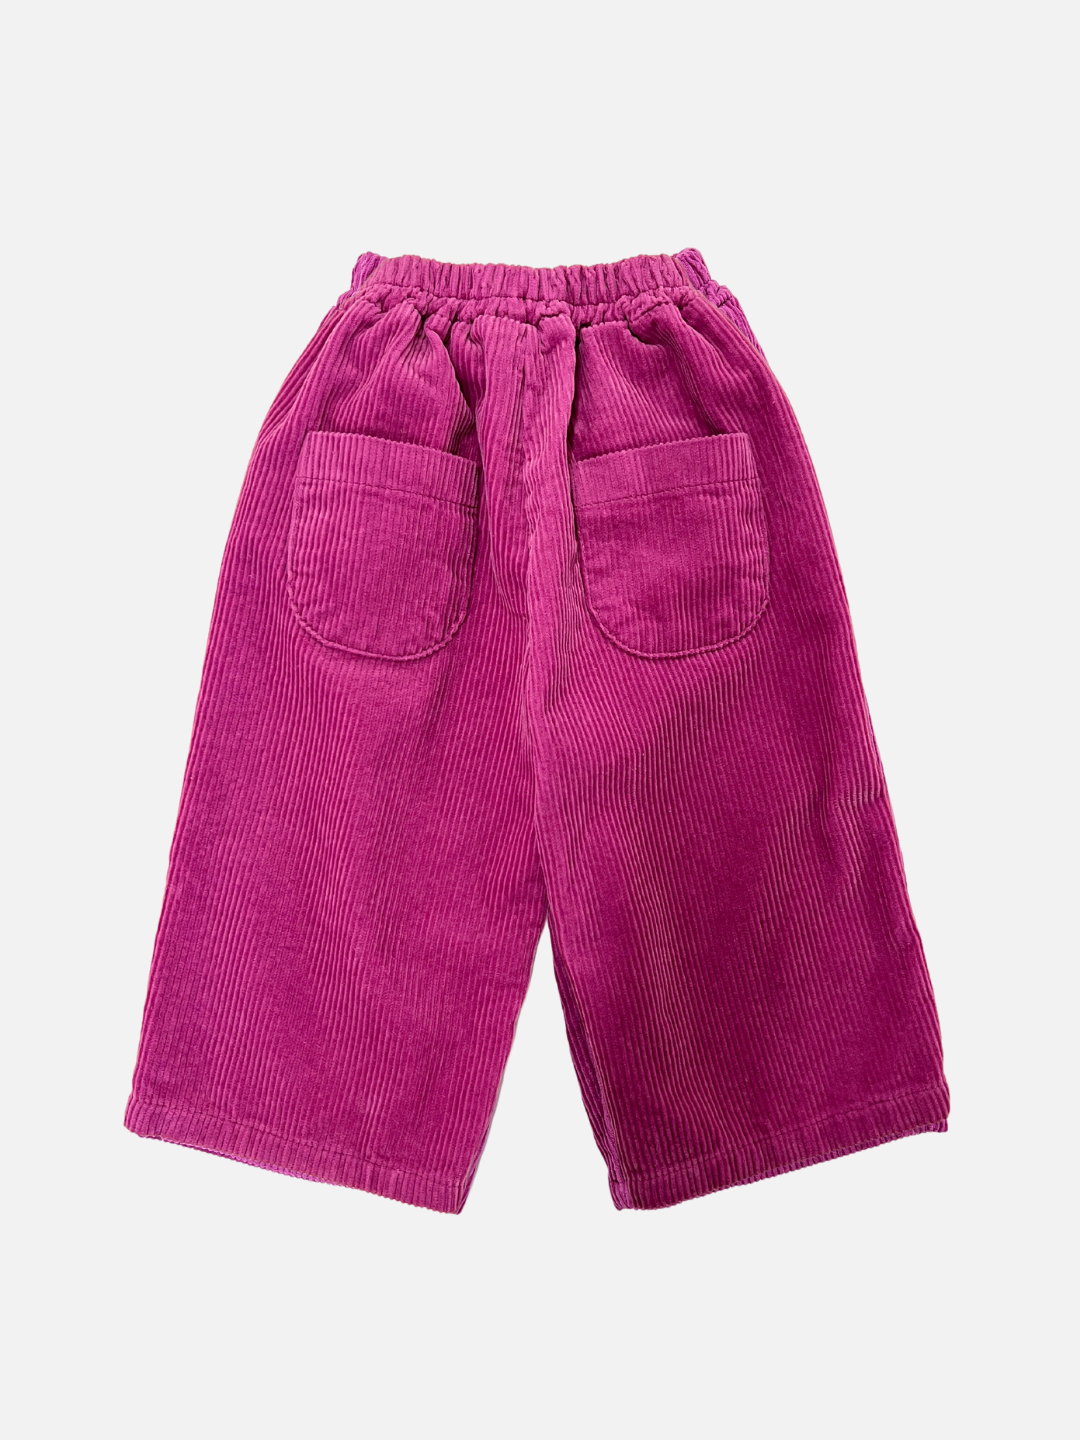 Magenta | Back view of kids wide-leg corduroy pants in magenta pink, showing two rounded back pockets.